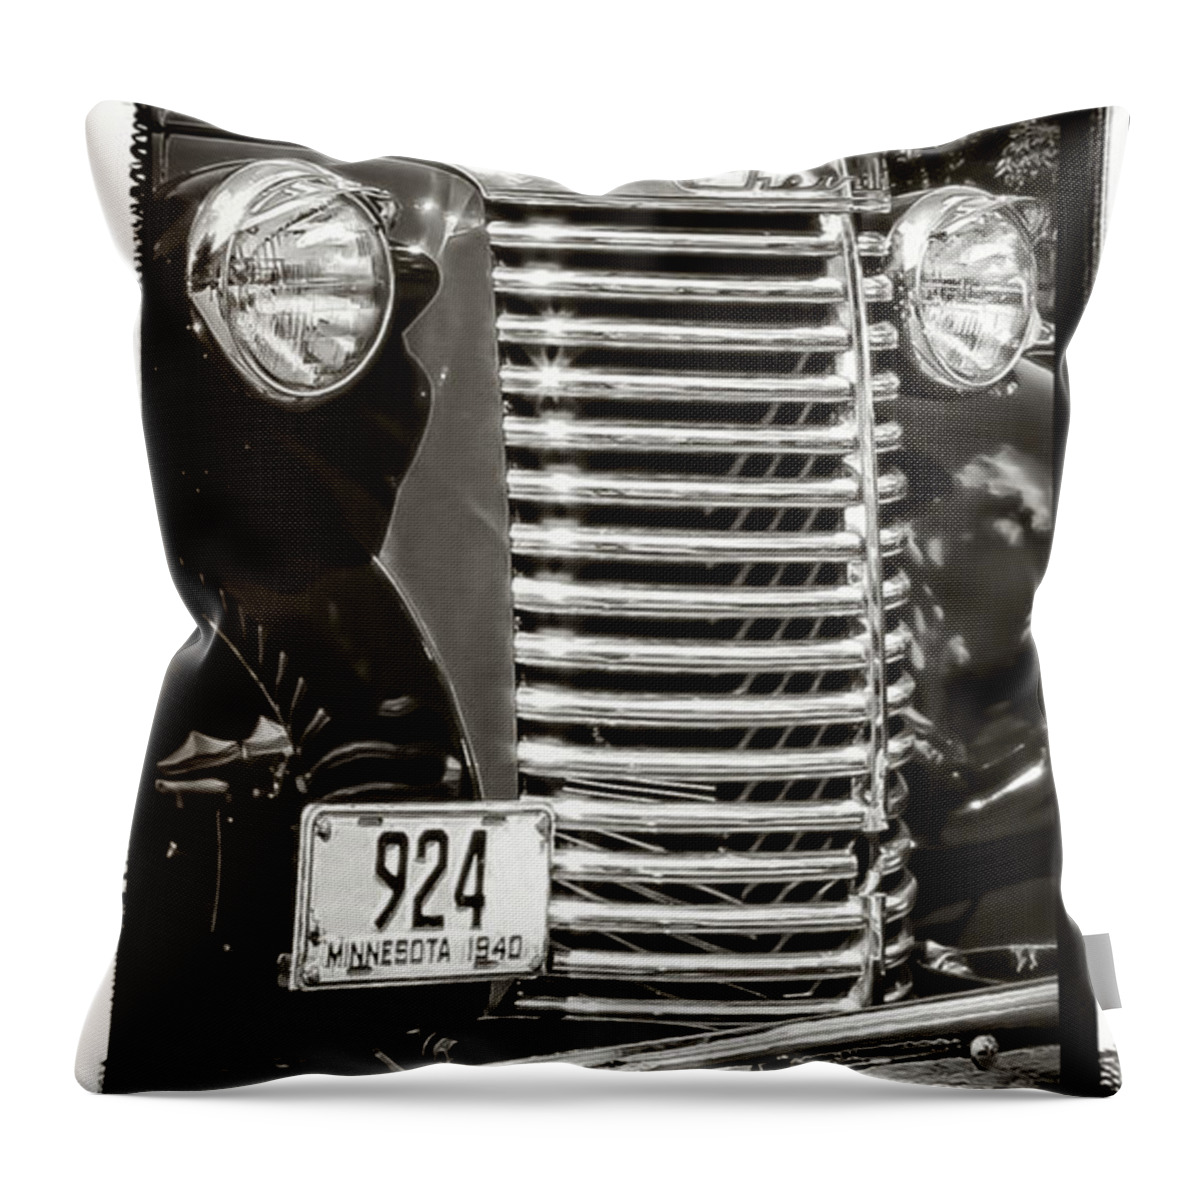 Truck Throw Pillow featuring the photograph Chrome Style by Perry Webster